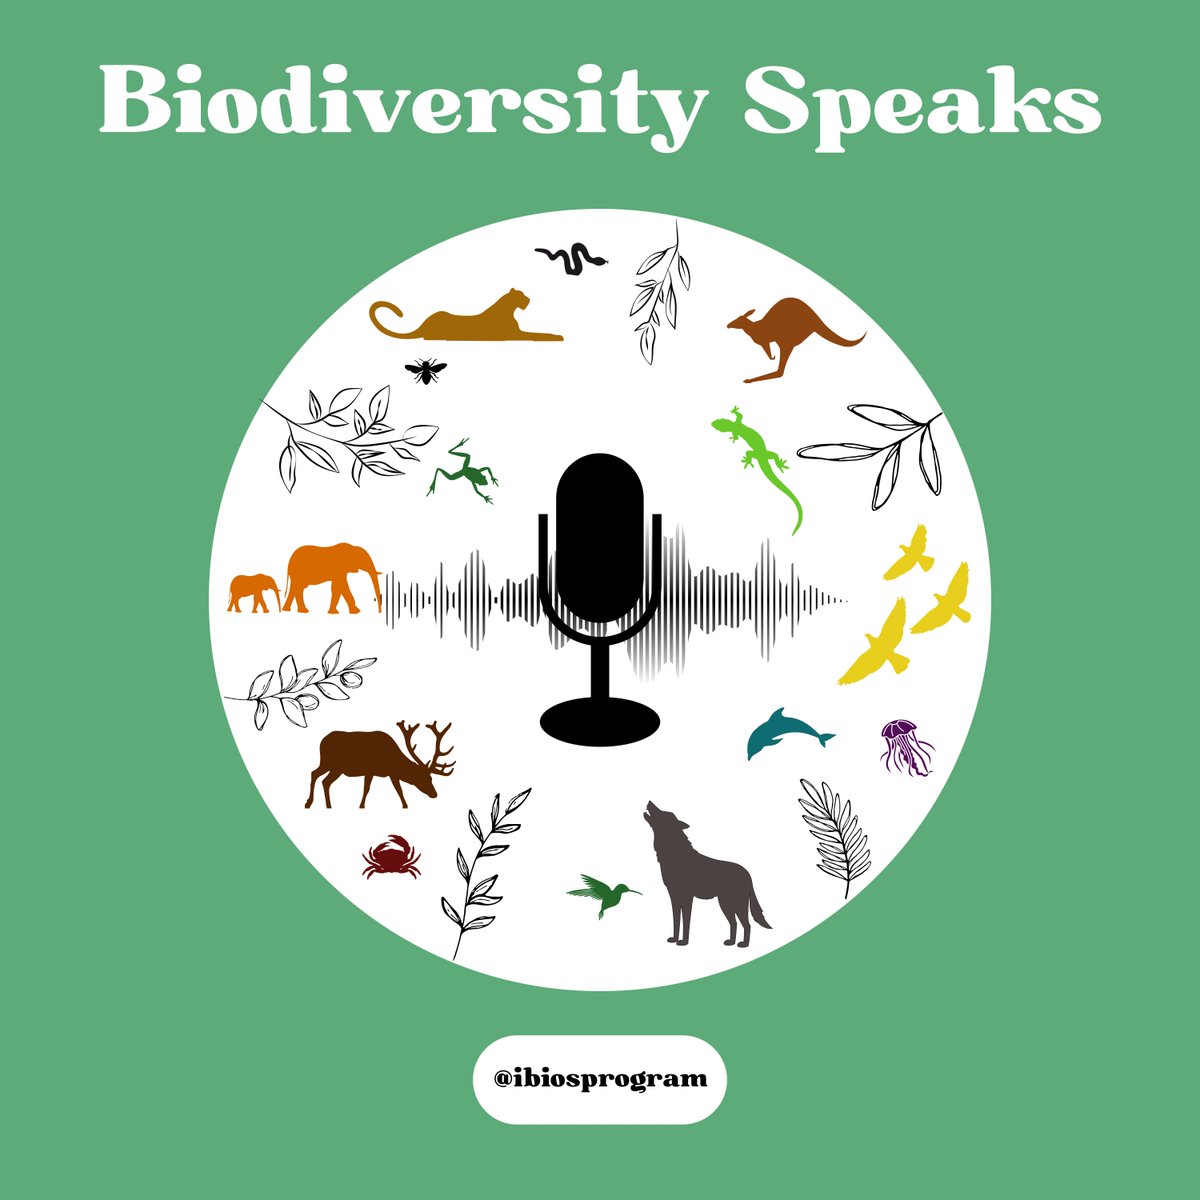 Coming soon: Biodiversity Speaks In our upcoming podcast series, our host Dr. @HelinaJolly discusses various biodiversity topics with selected speakers that offer a glimpse into their journey into the world of biodiversity conservation. Stay tuned for more details!